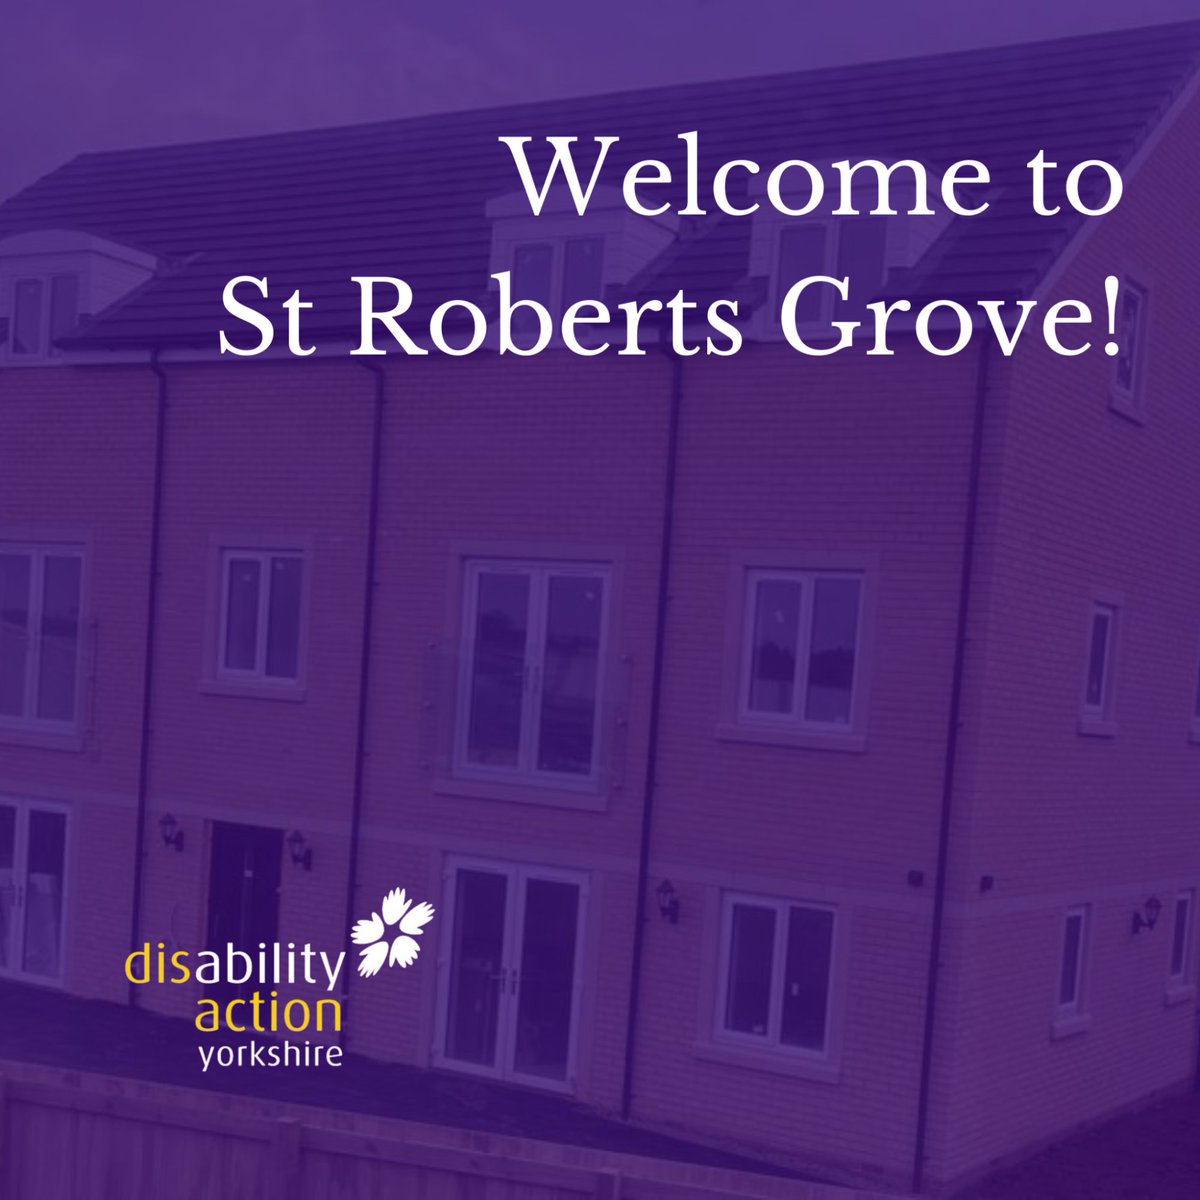 We are thrilled to officially announce the opening of St Roberts Grove, our brand new residential house dedicated to fostering independence for people with disabilities! We are incredibly grateful to Highstone Building Services for making this dream a reality. #DAY